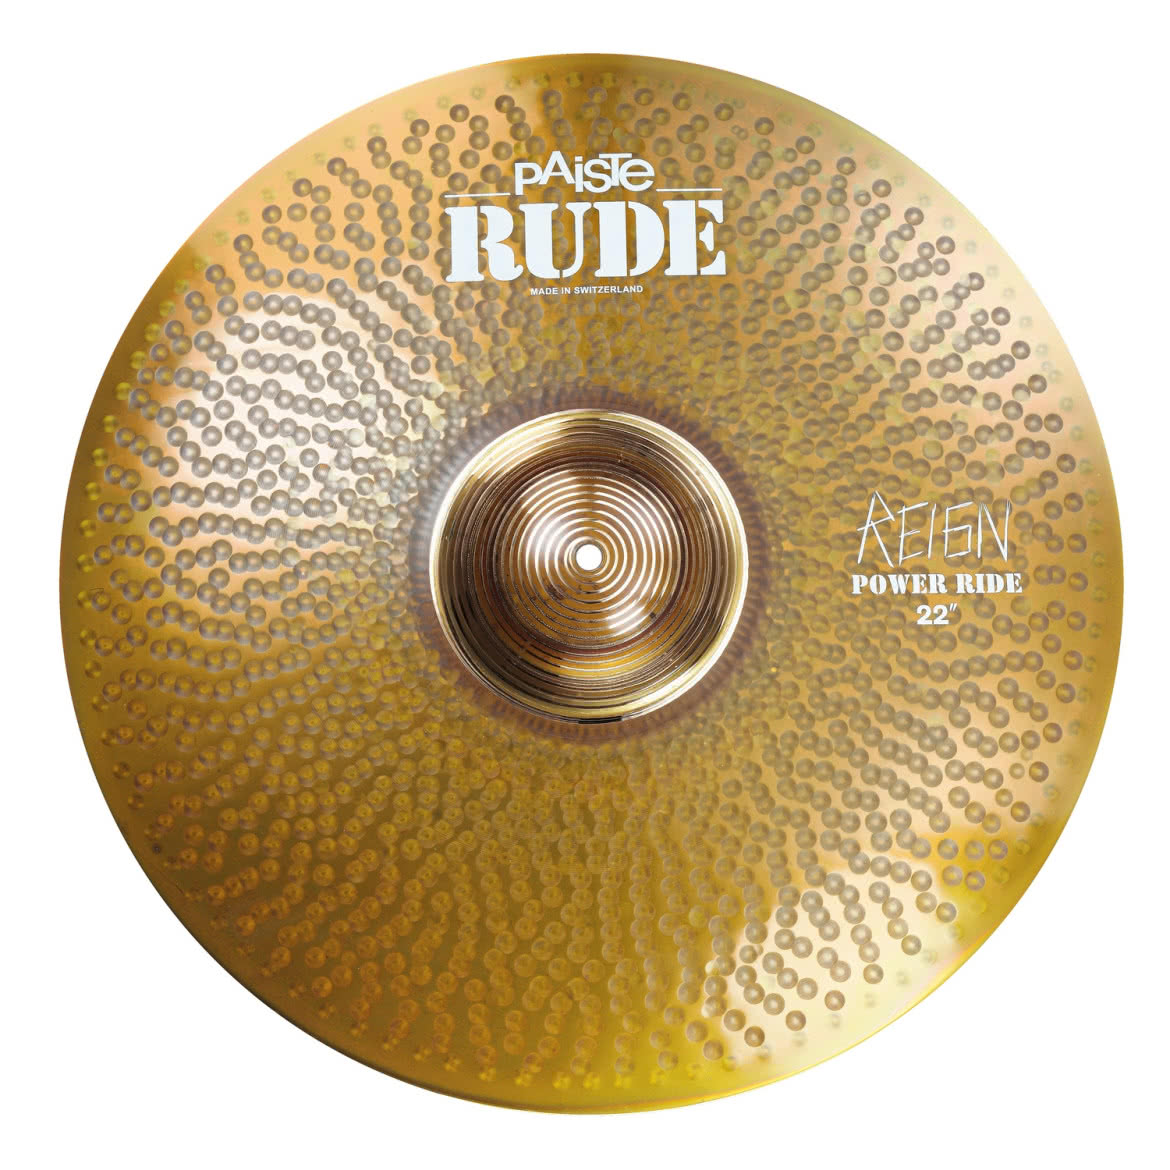 Rude Power Ride The Reign 22”